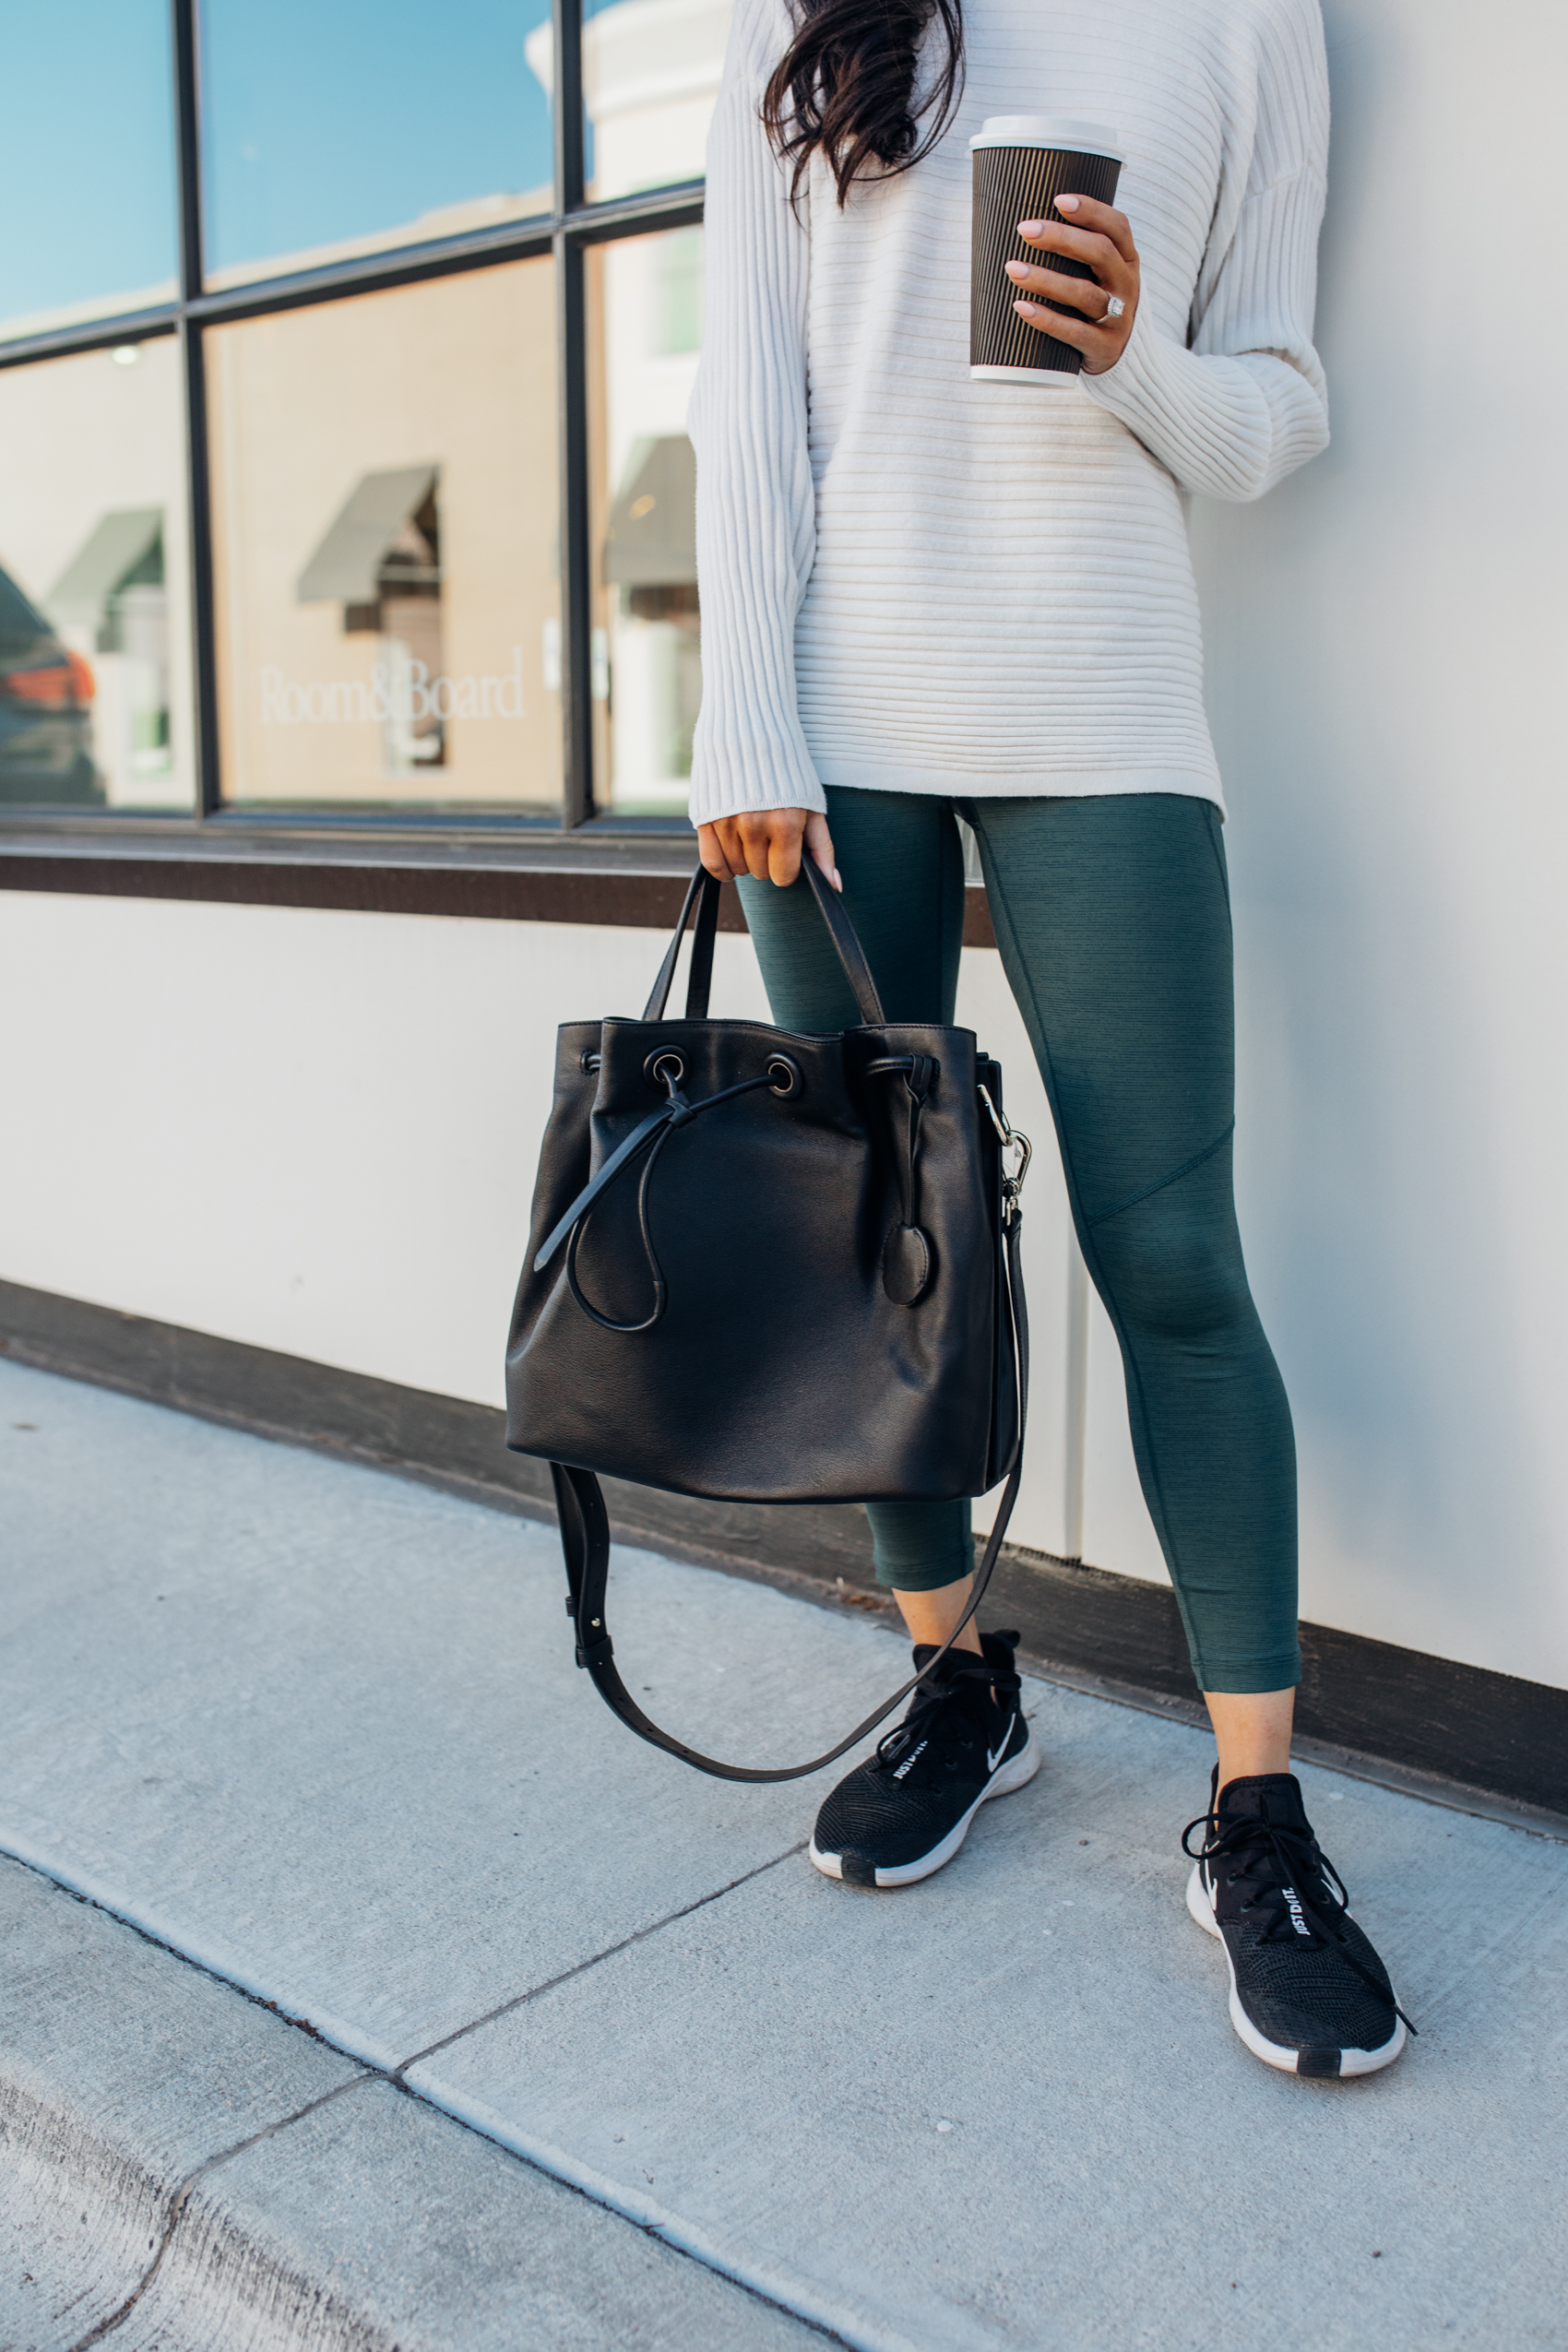 White ribbed sweater Outdoor voices 3/4 leggings Nike free tr8 sneakers cole haan grand ambition bucket bag athleisure outfit dallas fashion blogger Hoang-Kim